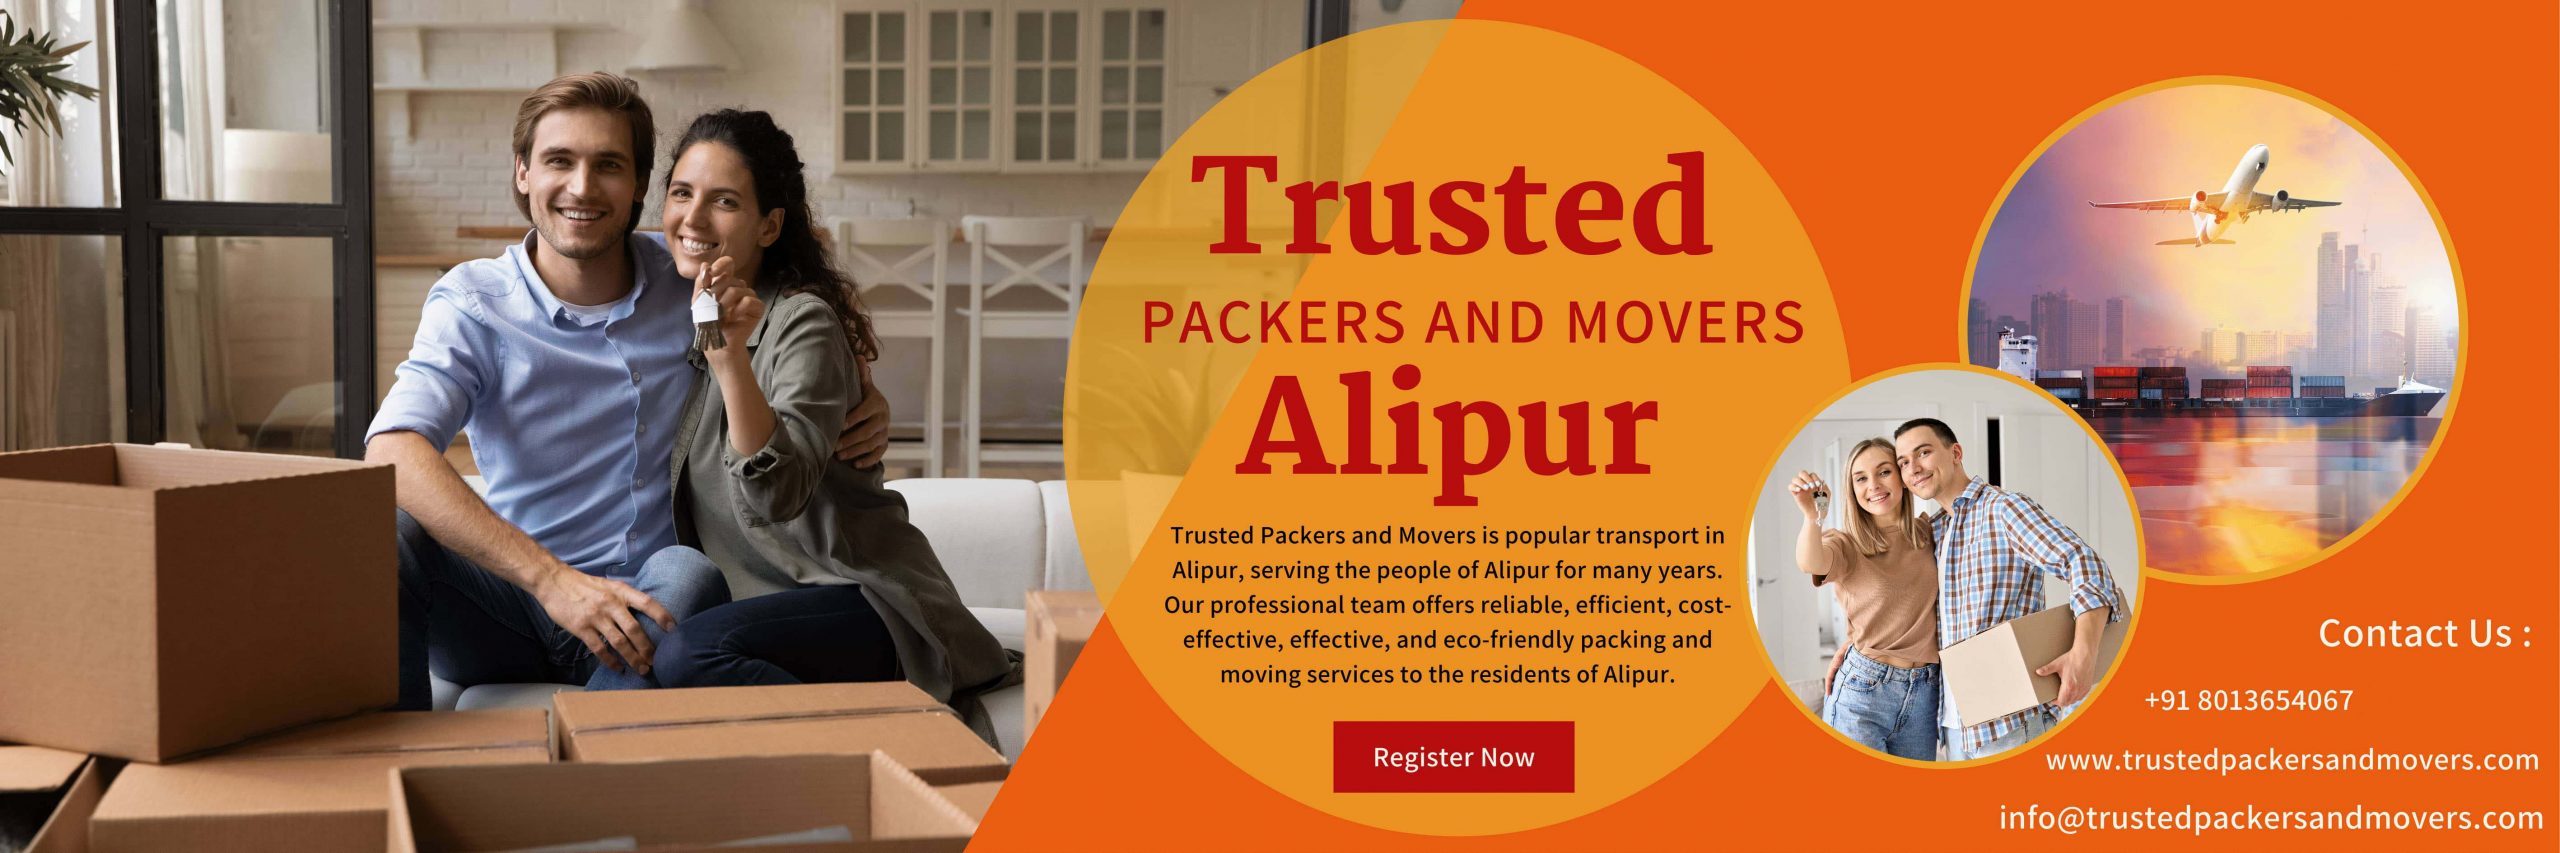 Trusted Packers and Movers Alipur